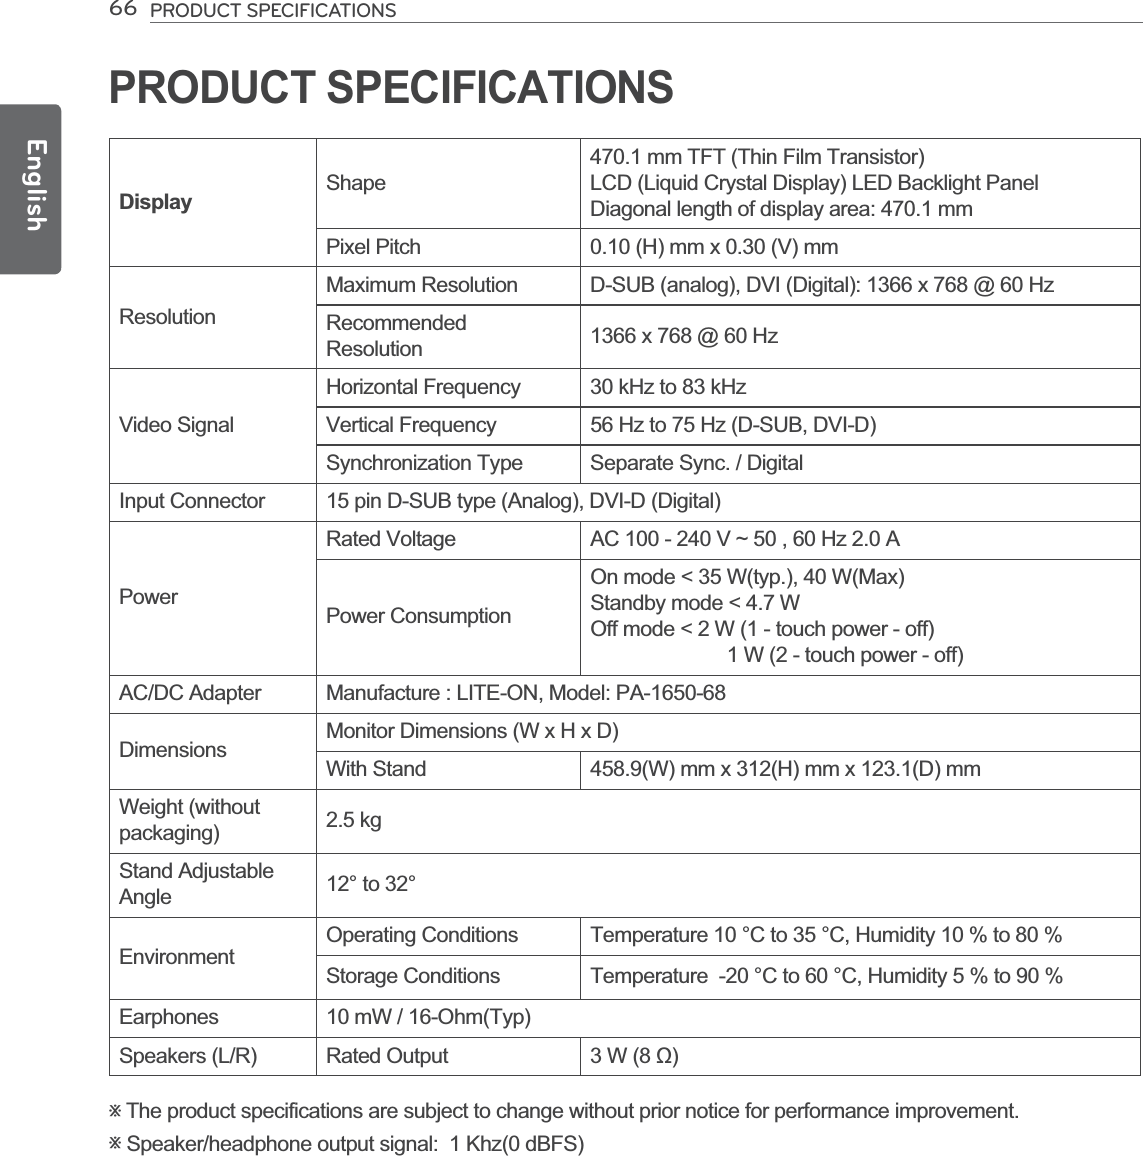 66EnglishPRODUCT SPECIFICATIONS                   ؚؚ